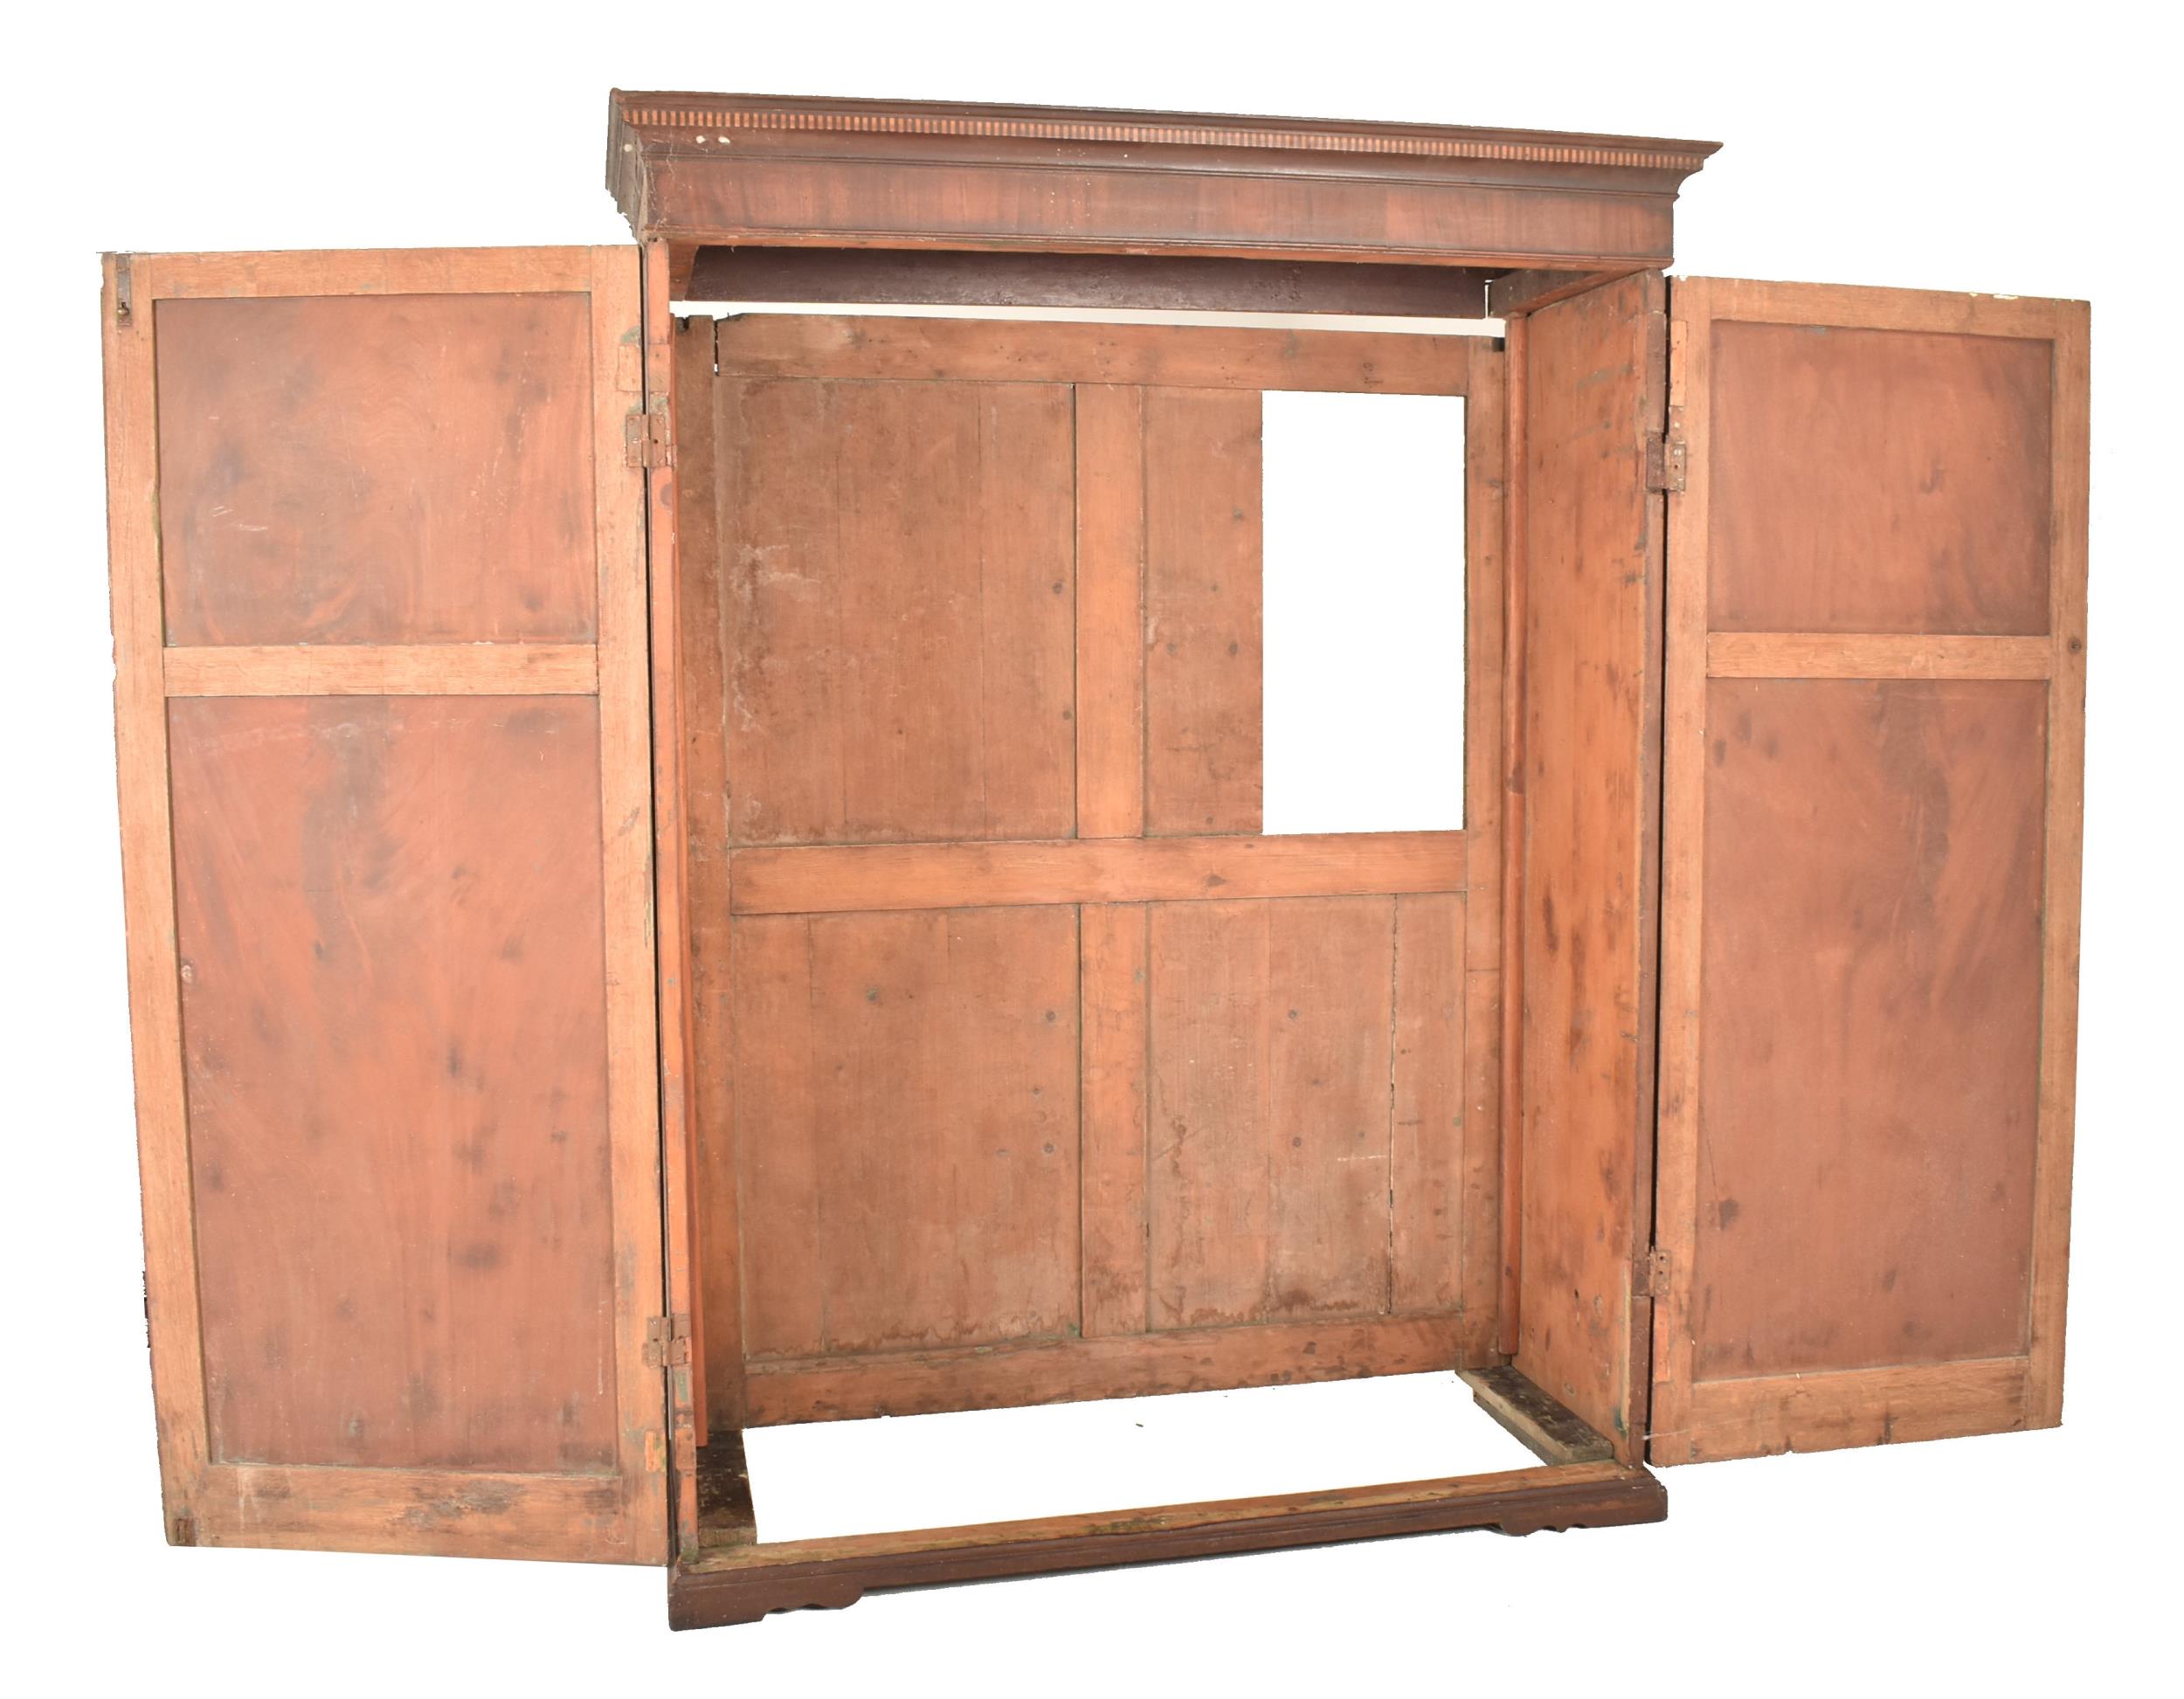 LARGE EARLY 19TH CENTURY GEORGE III DOUBLE WARDROBE - Image 2 of 6